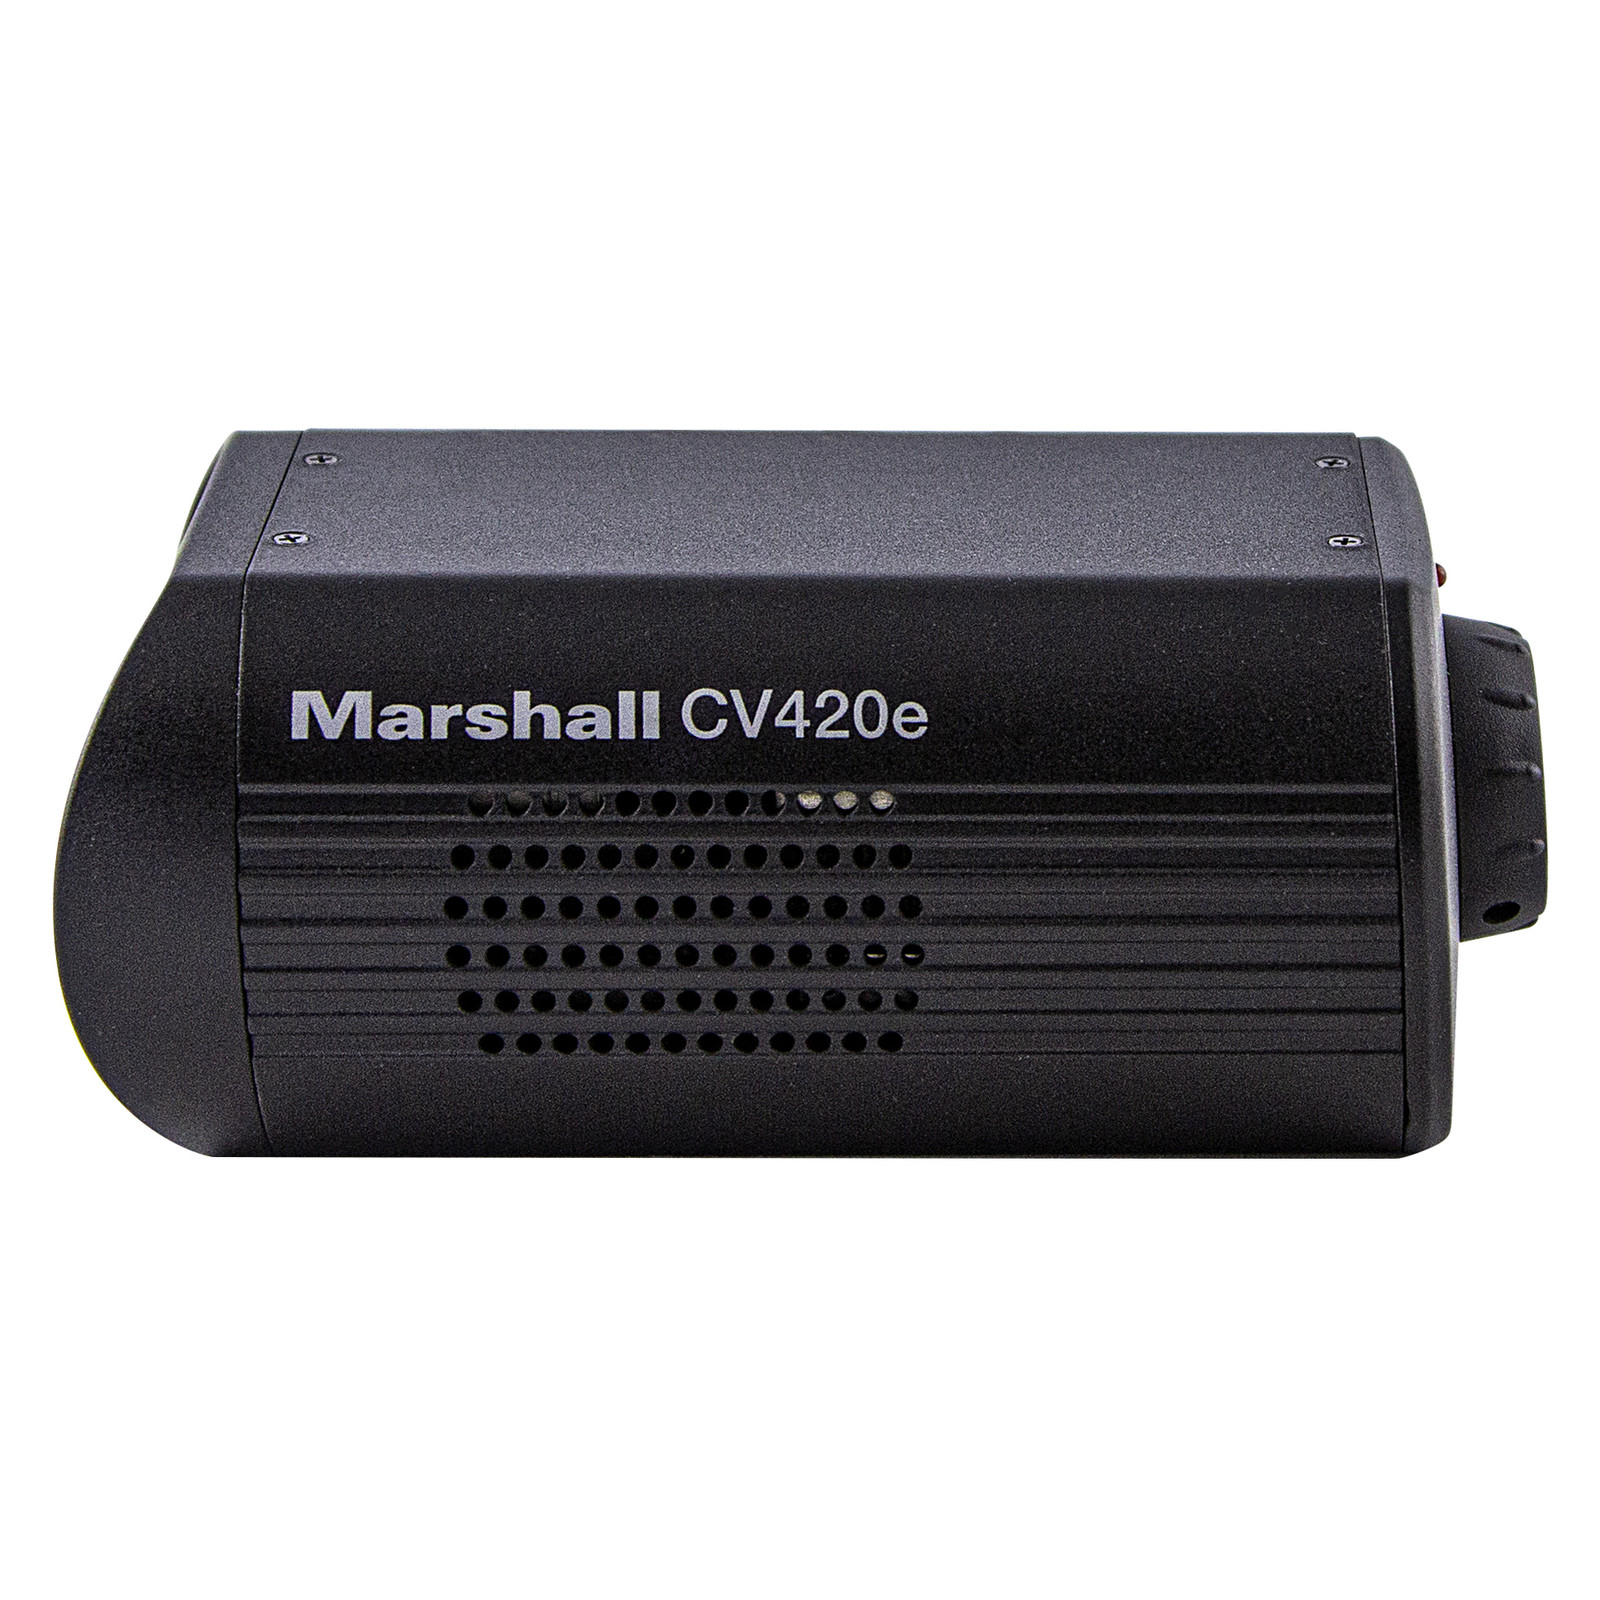 Marshall Compact UHD Camera with ePTZ Functionality – USB 3.0, HDMI & IP Ethernet Outputs